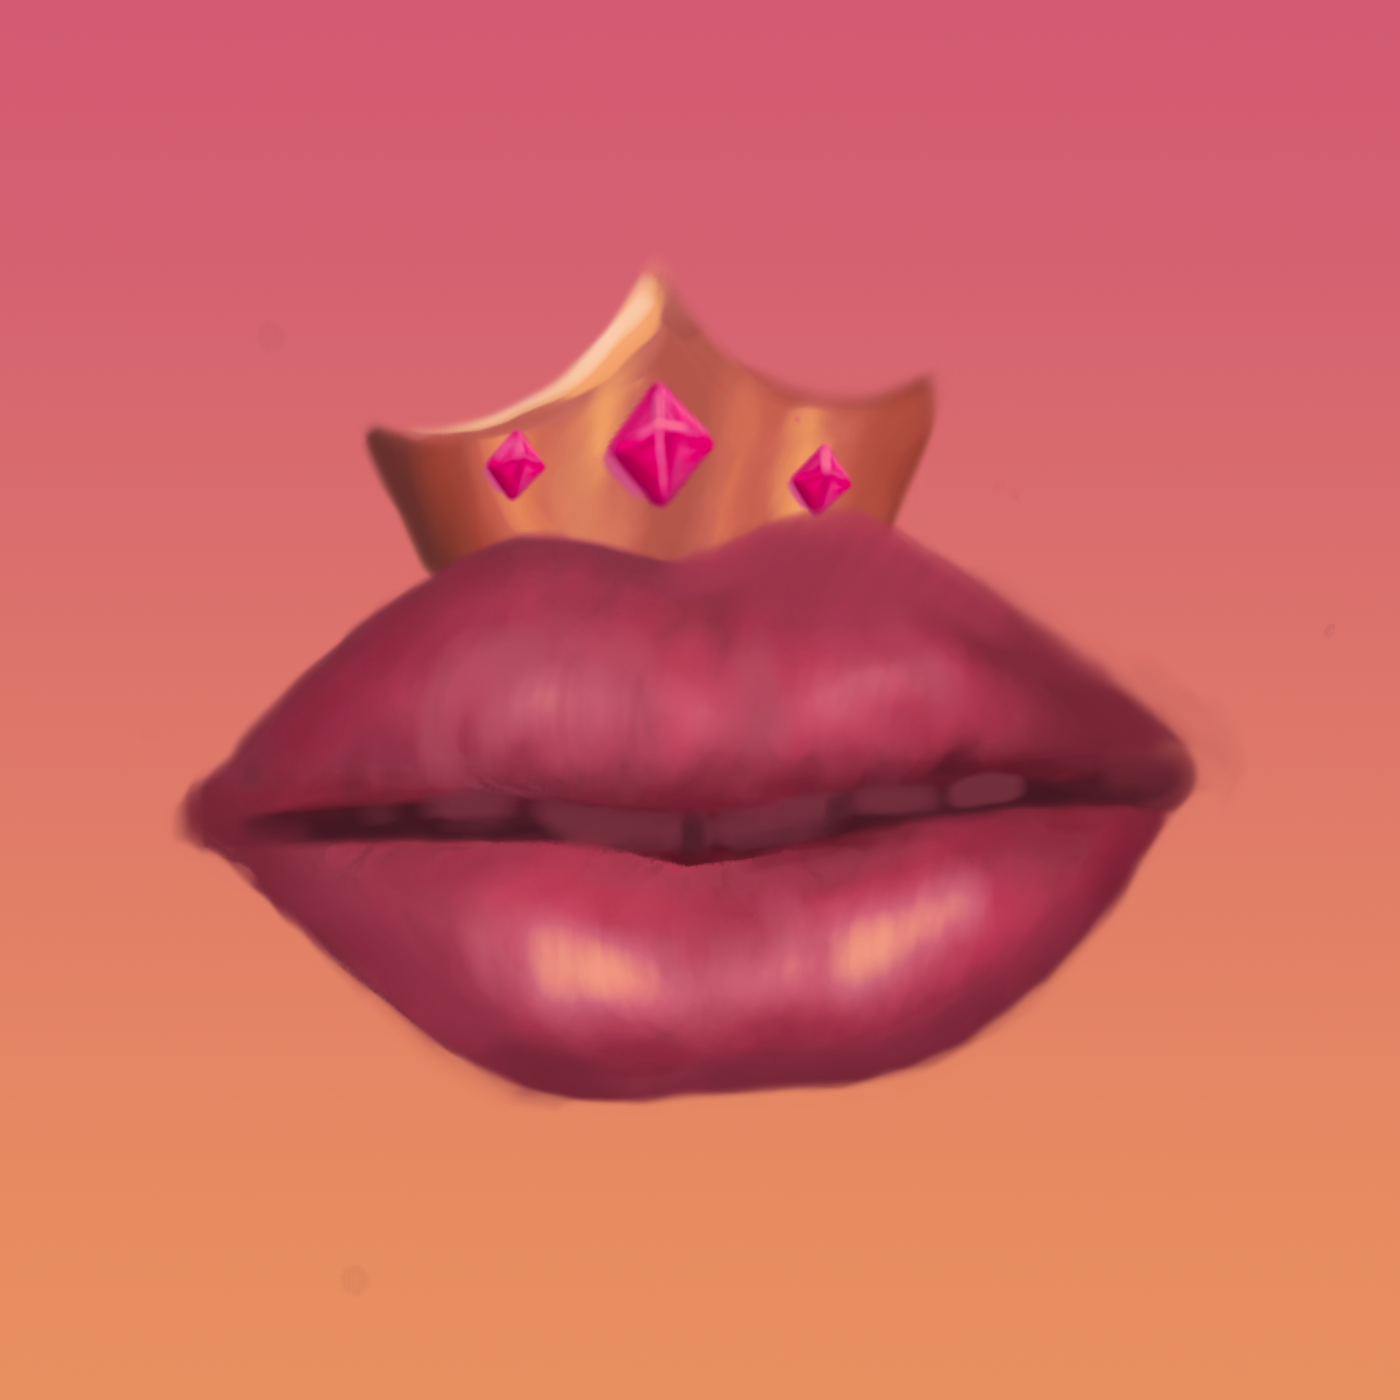 illustration of a pair of lips wearing a jeweled gold crown